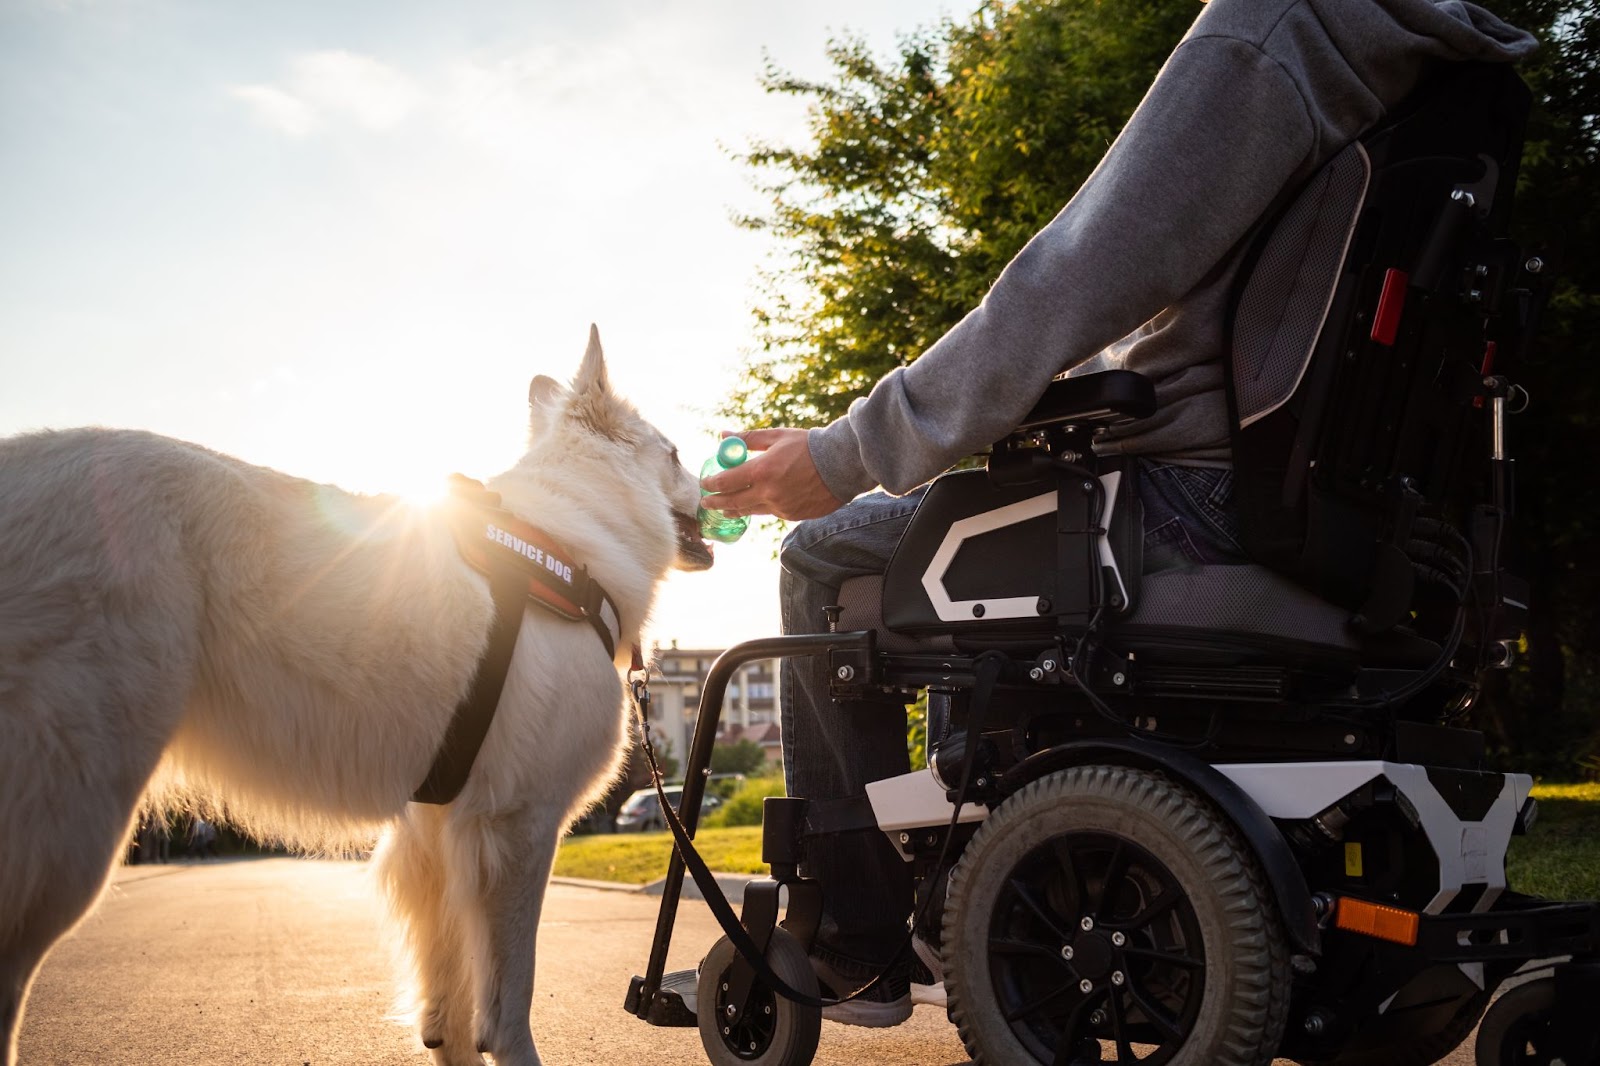 owner in a wheel chair with its service dog by its side